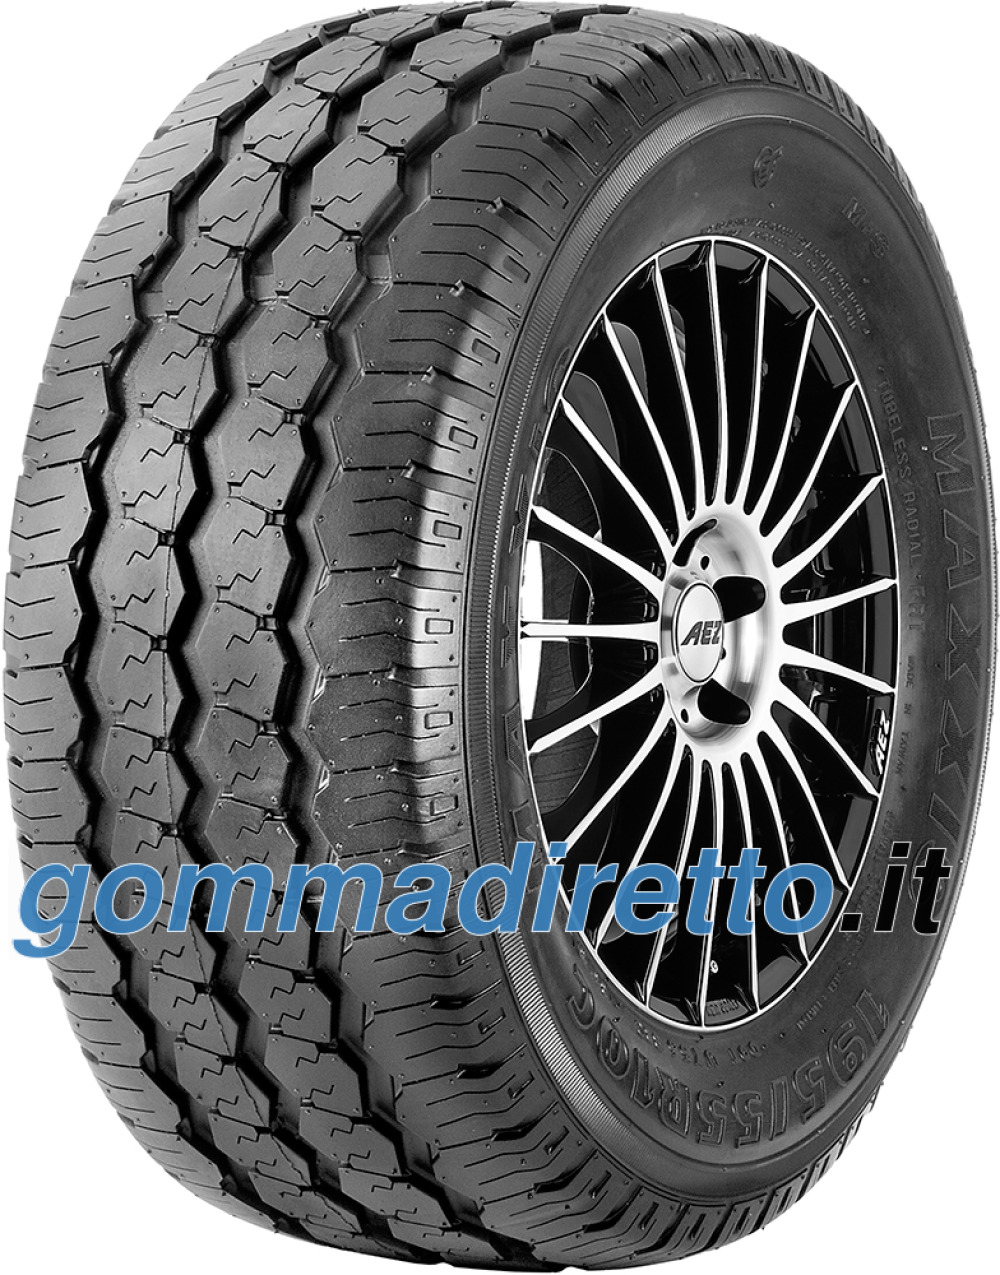 Image of Maxxis CR-966N ( 195/55 R10C 98/96P )